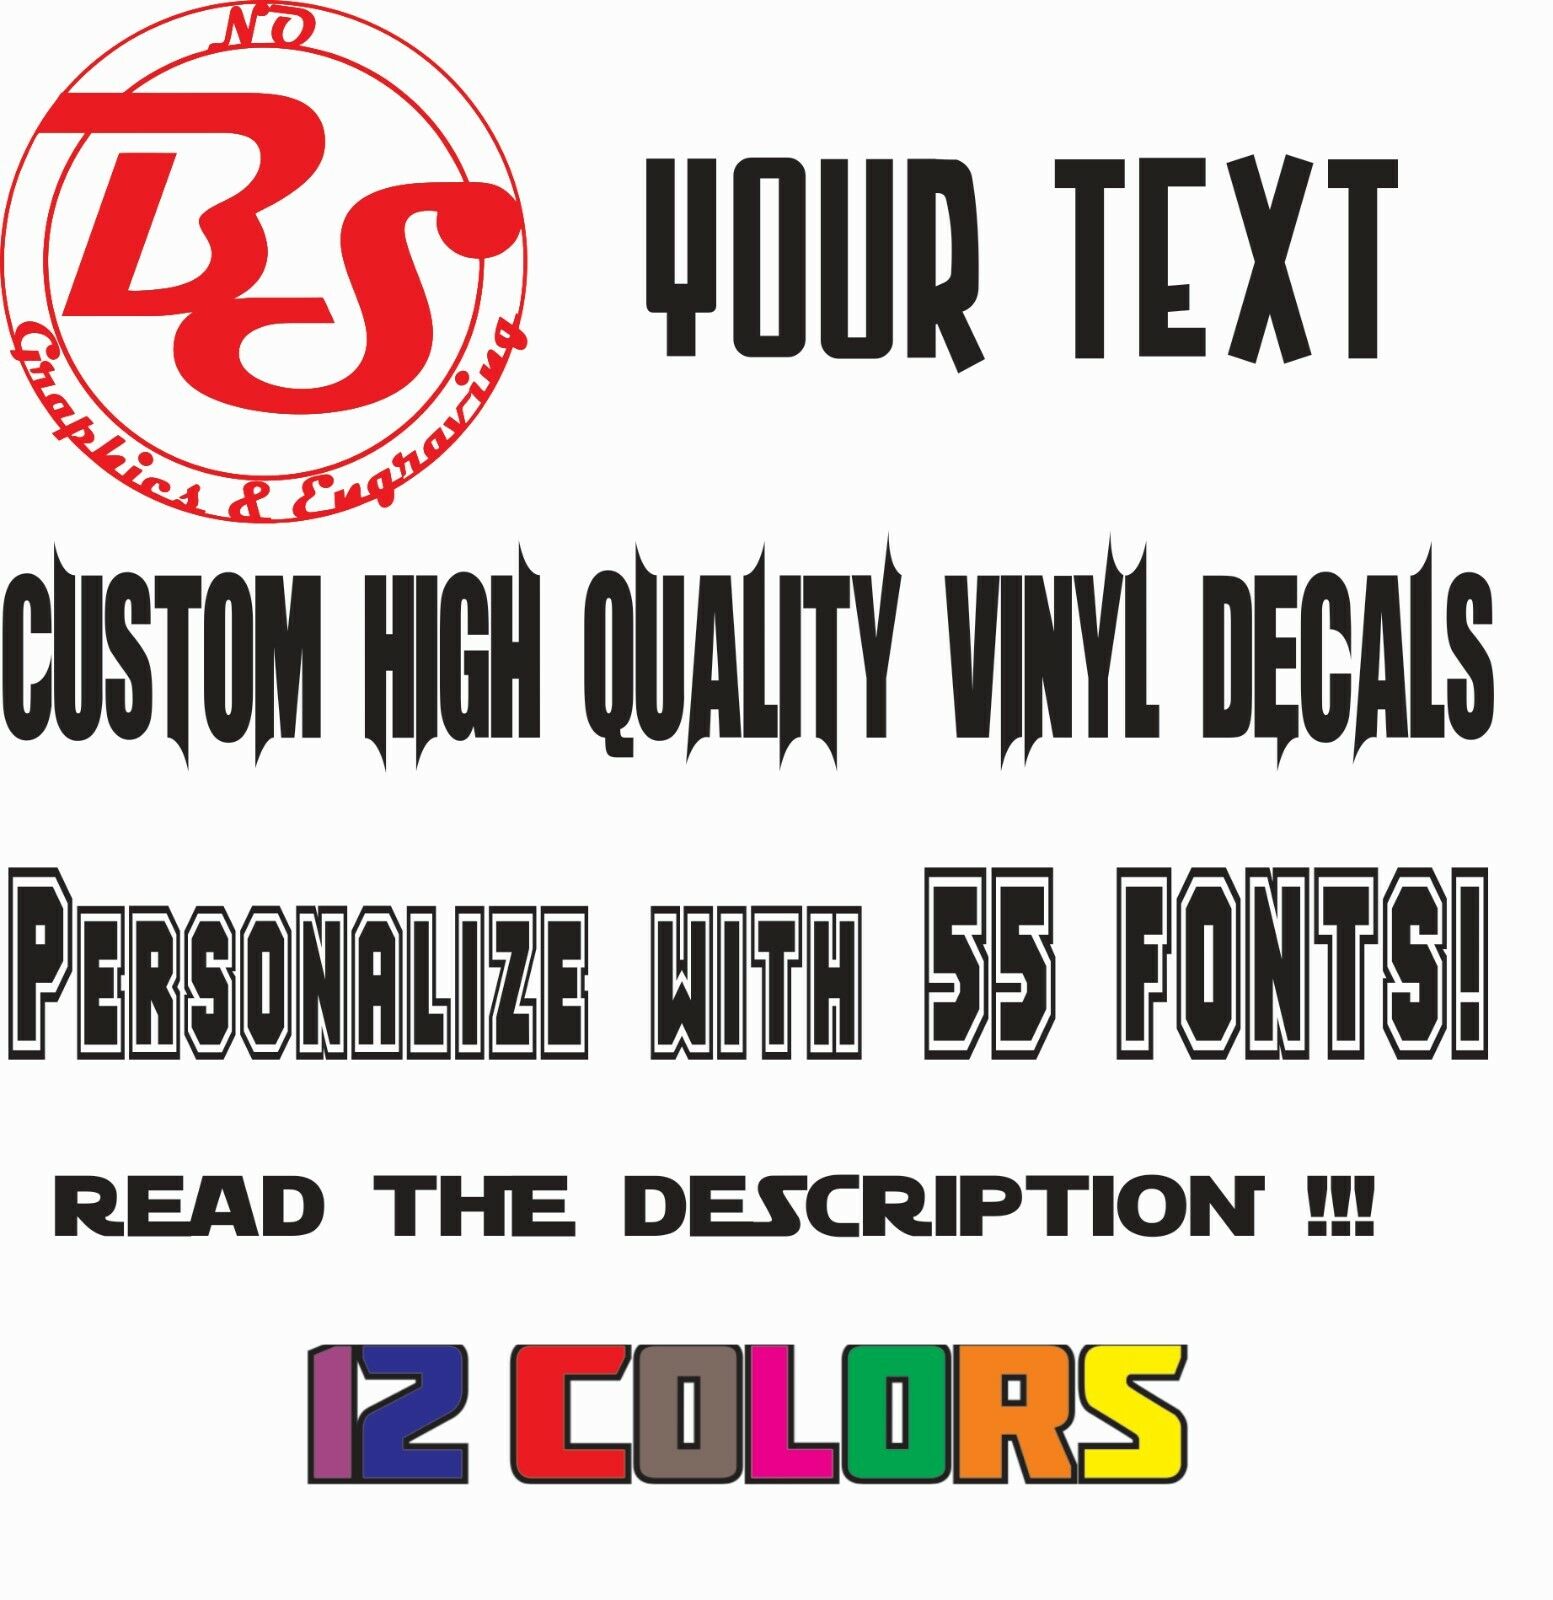 2-9" Custom Personalized Name Vinyl Decal Sticker For Wall Window Car Decor noBS noBS Graphics N/A